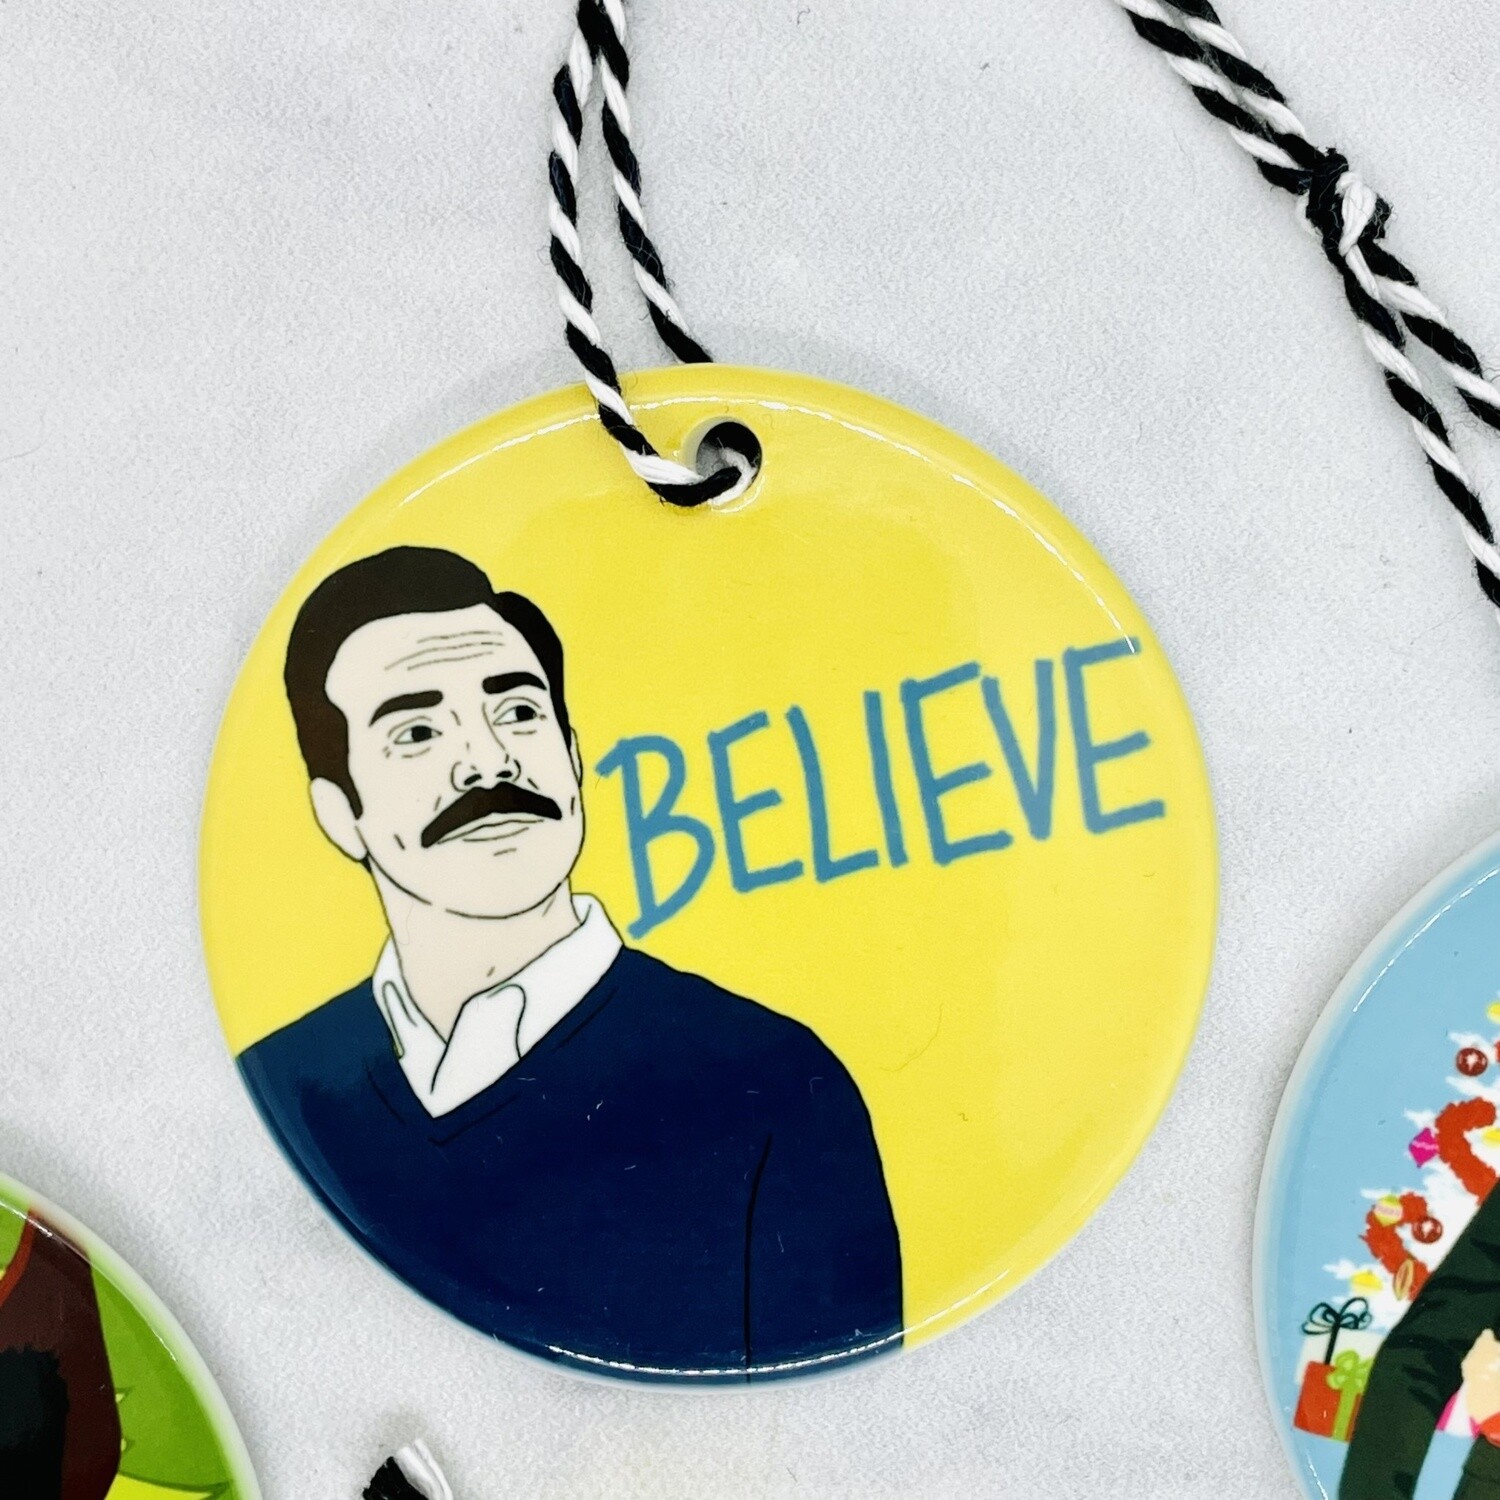 Ted Lasso "Believe" Ornament